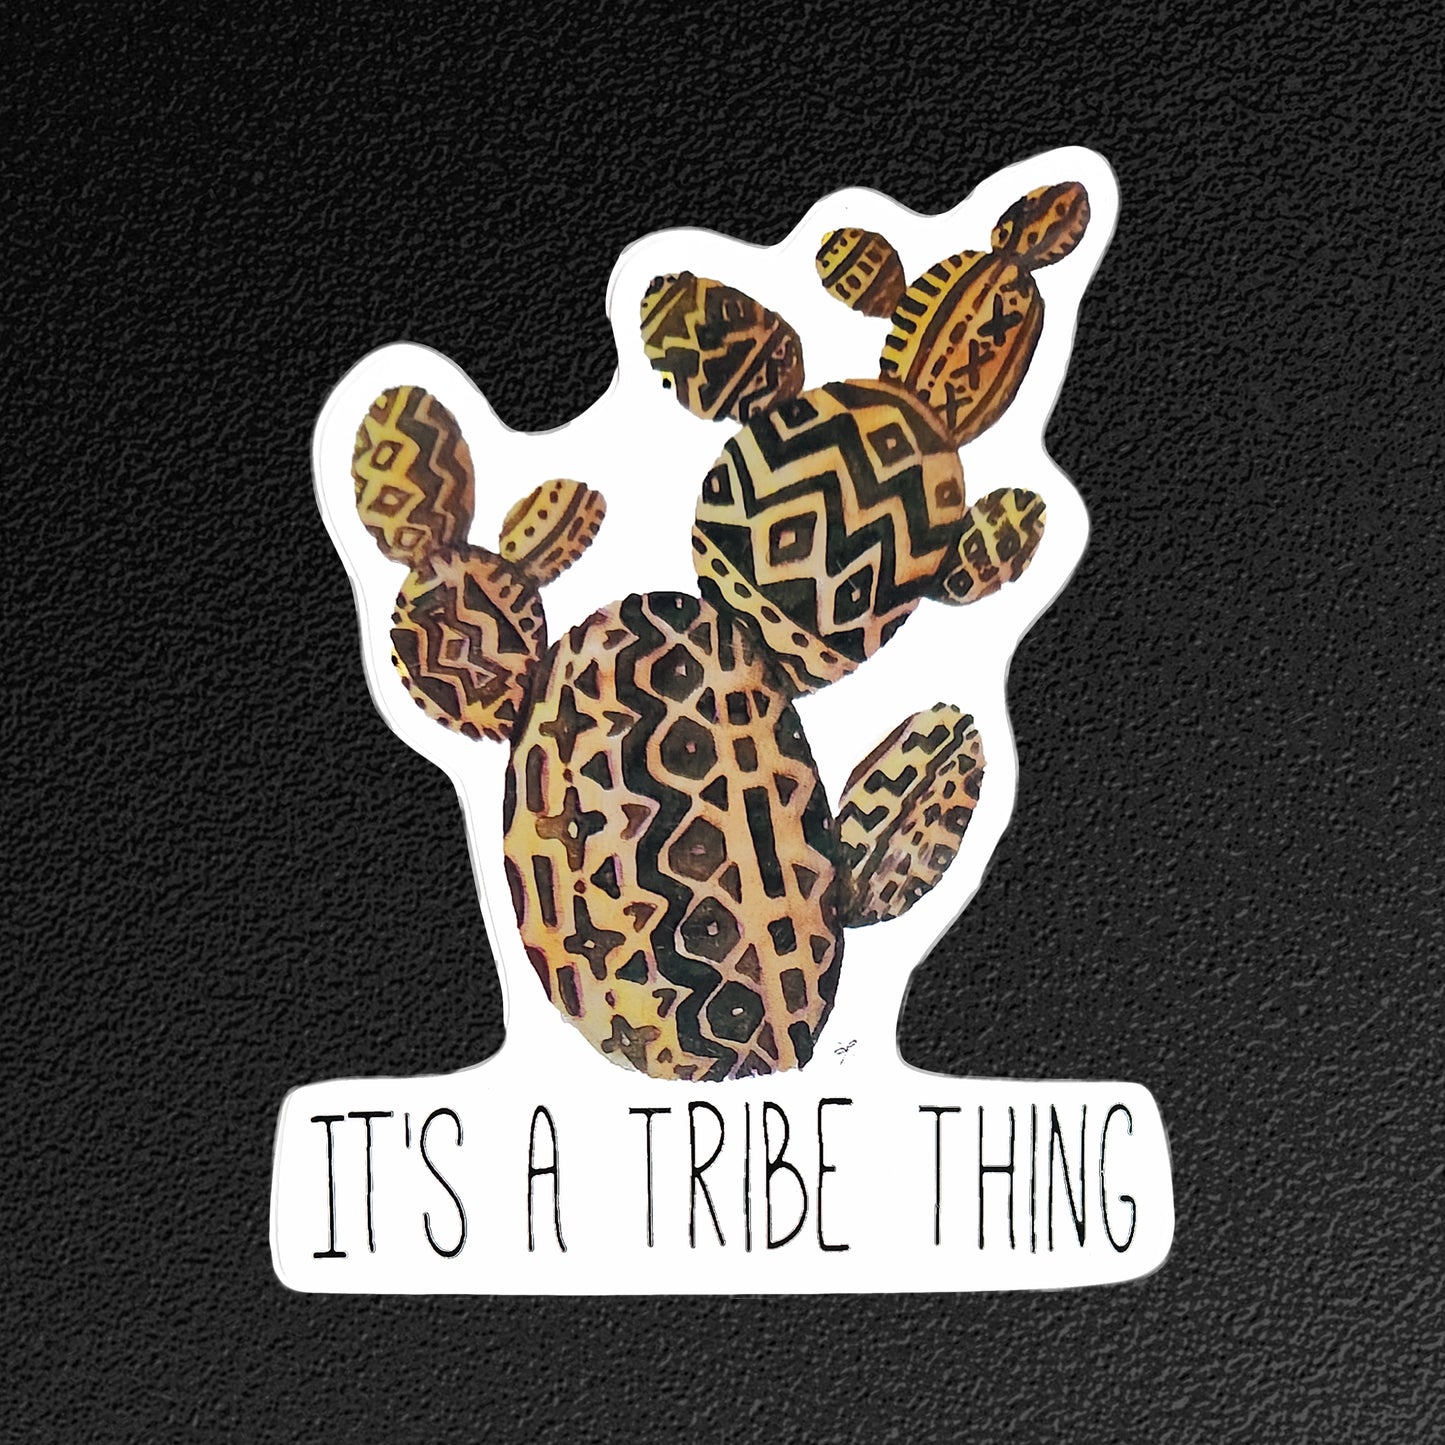 It's A Tribe Thing Vinyl Sticker/Decal